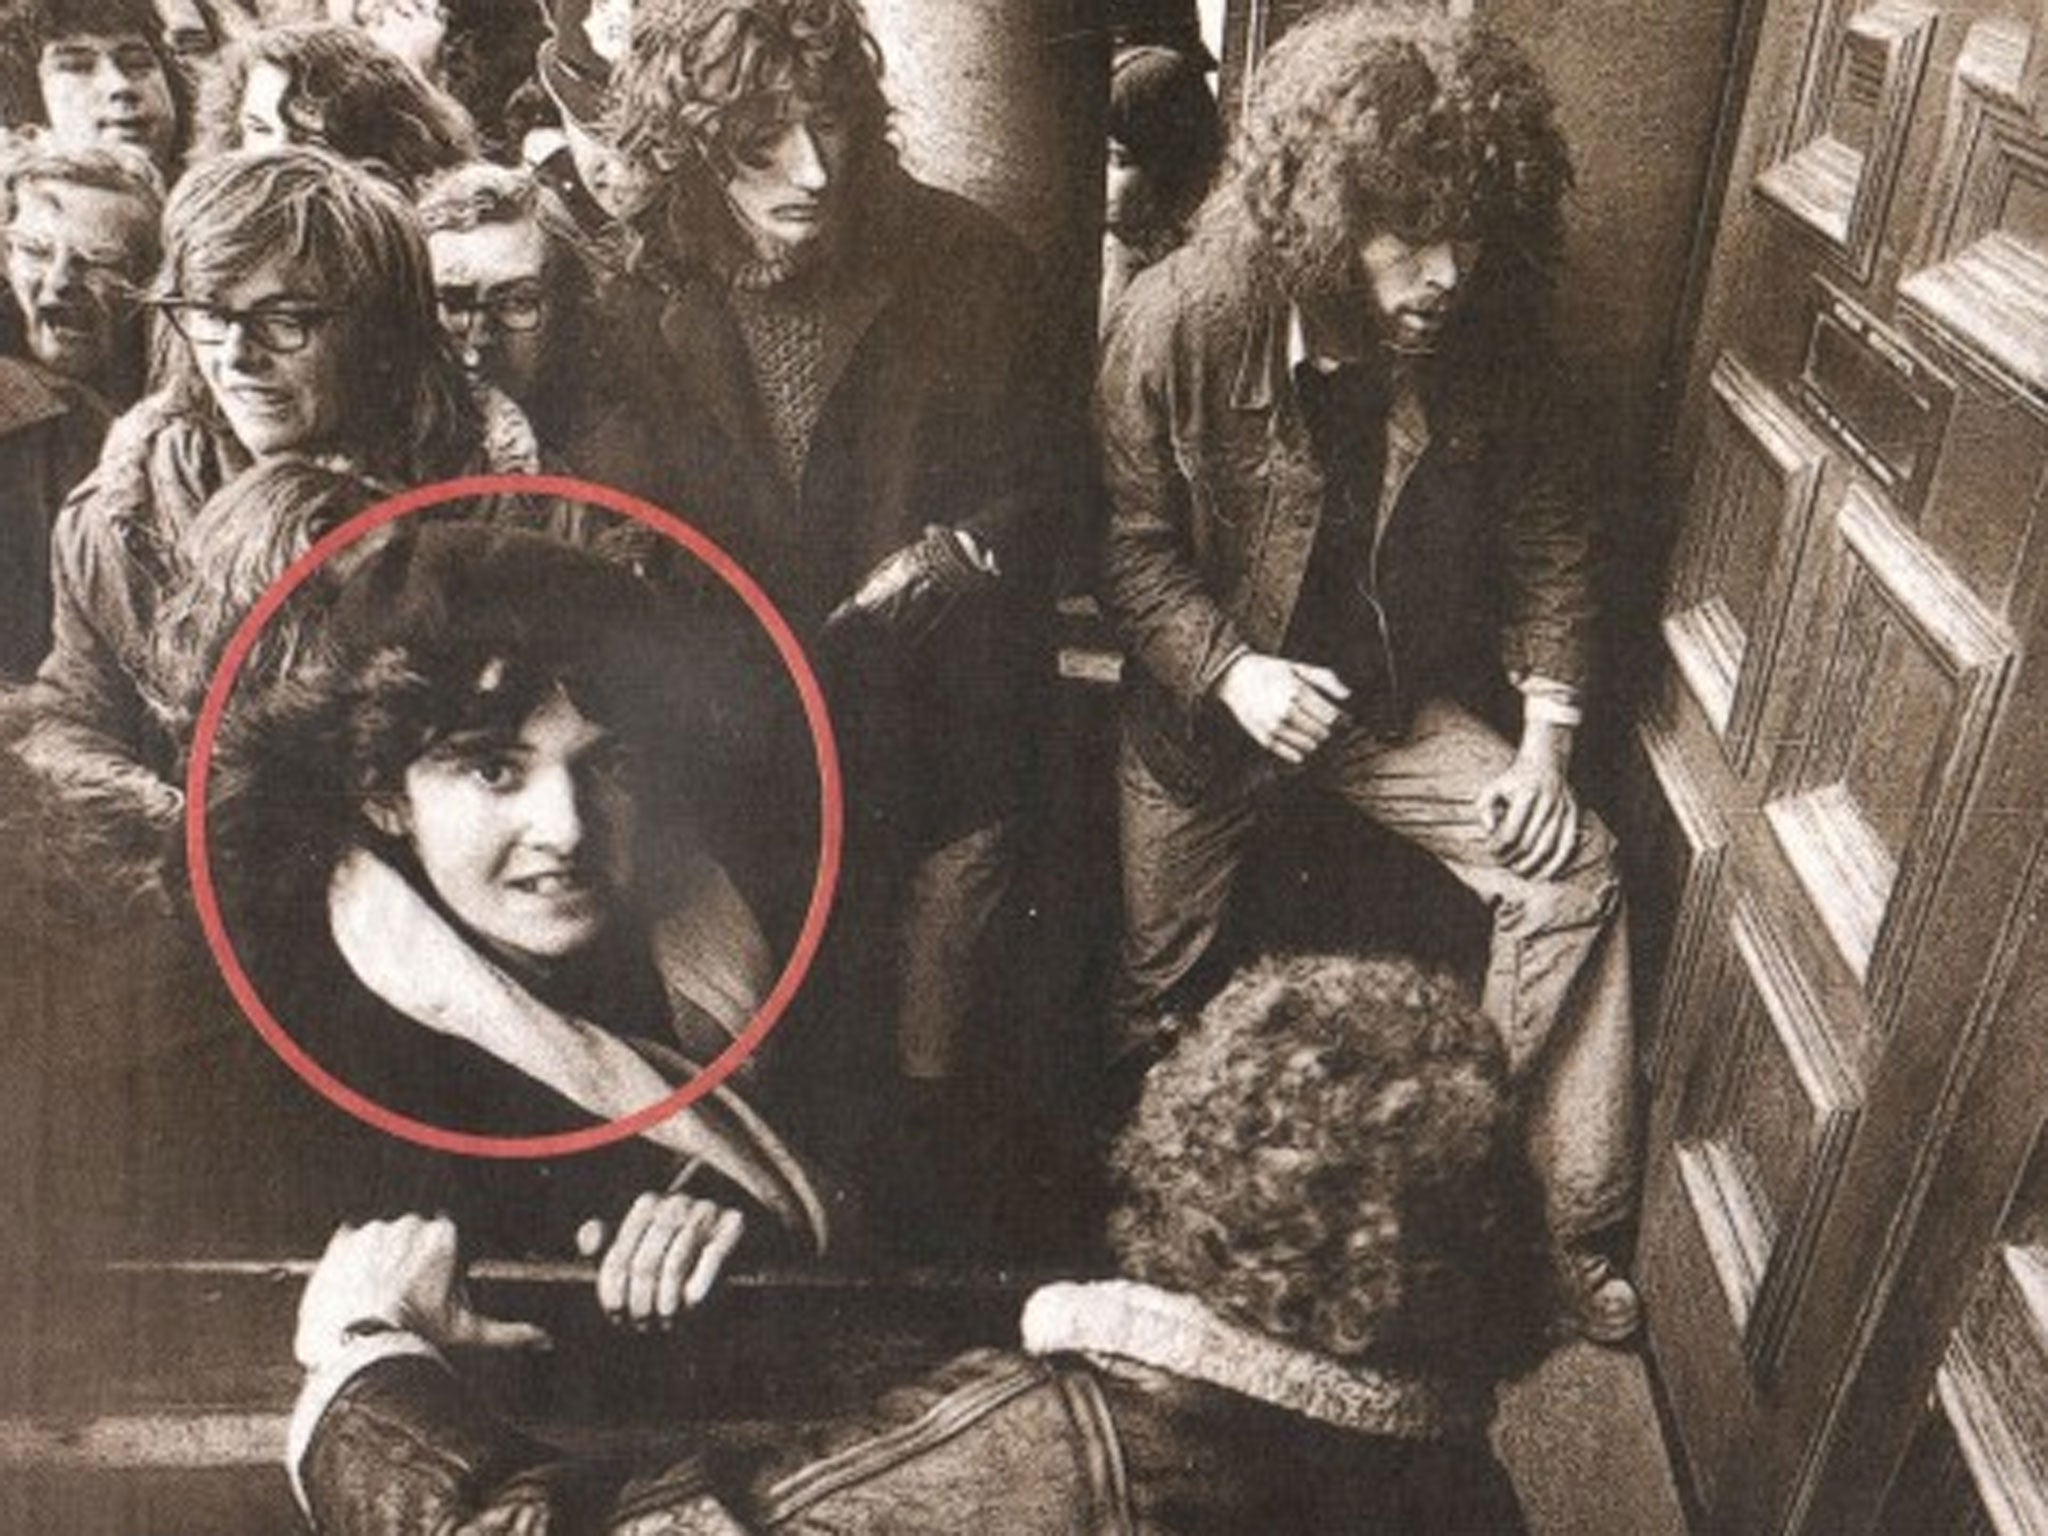 Huhne, circled, at a protest at Oxford in 1973